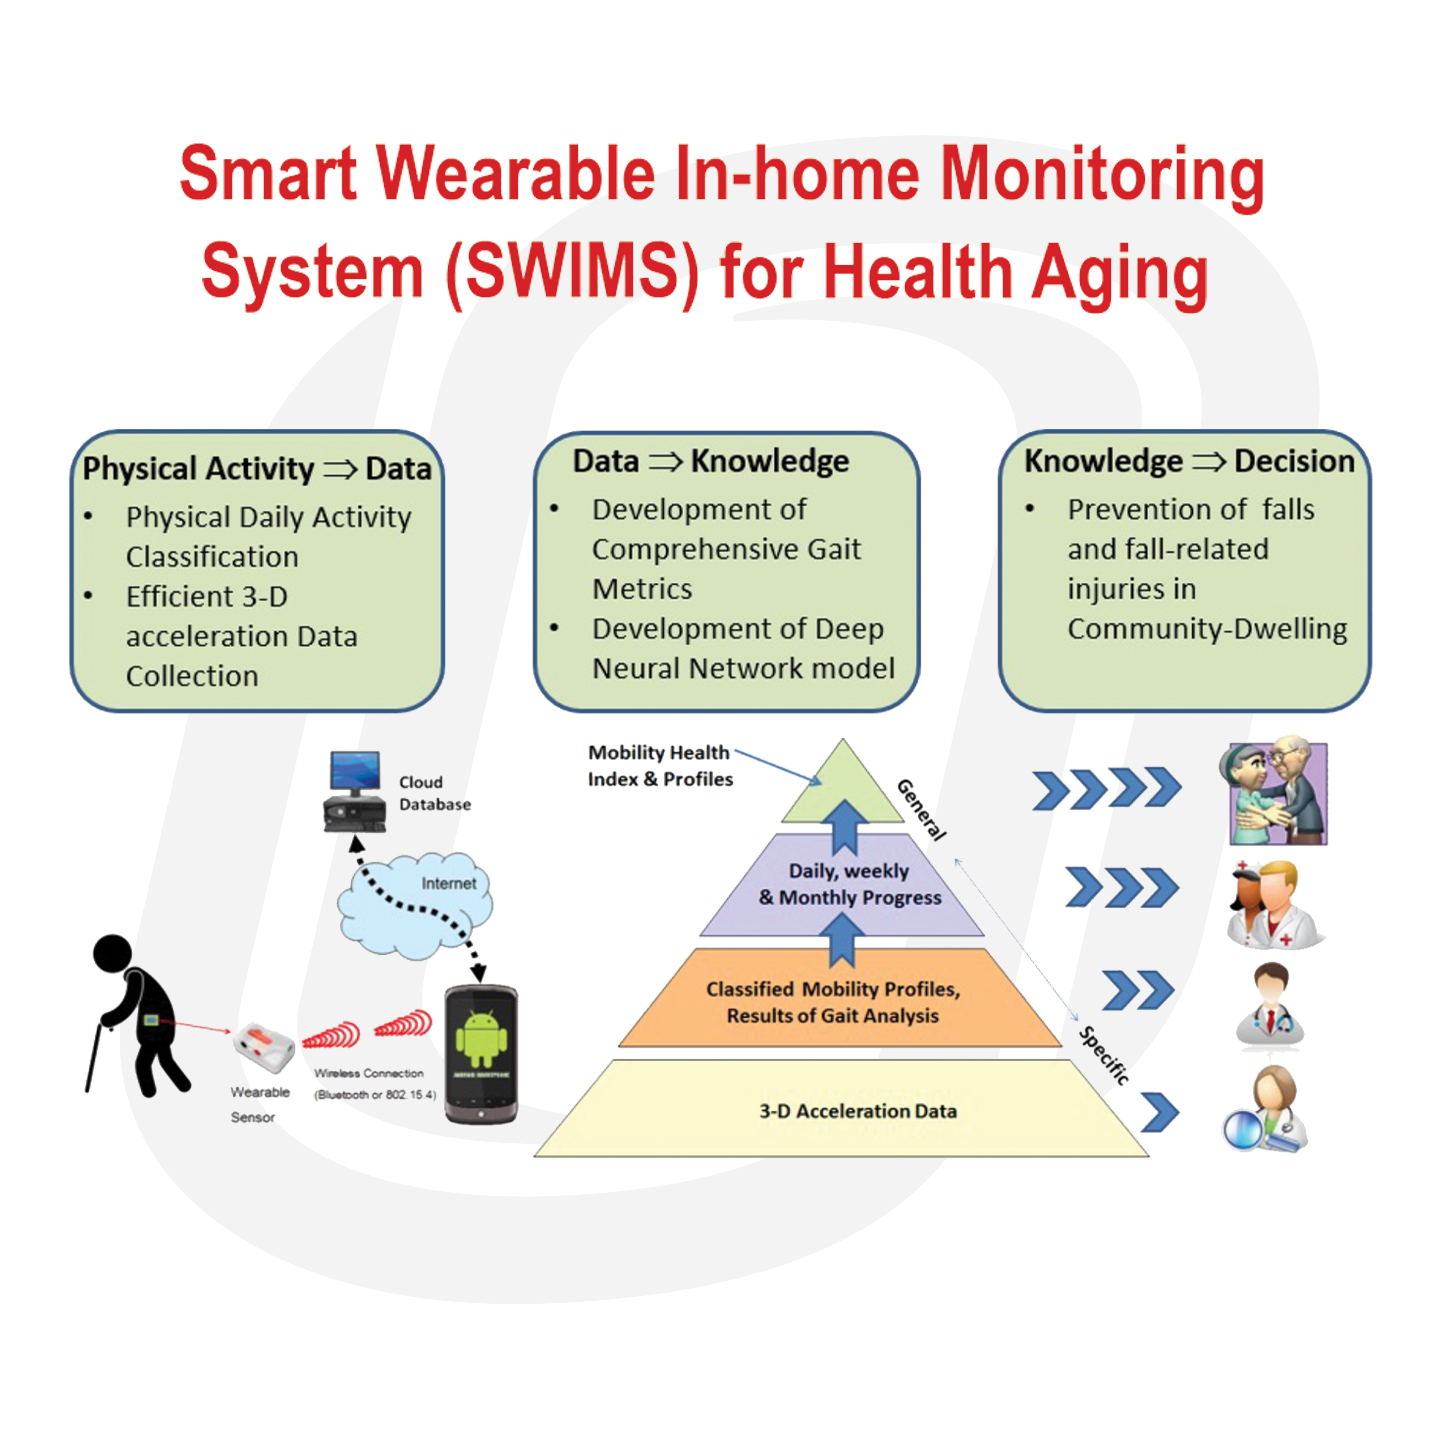 a diagram that shows a smart wearable In-home monitoring system (SWIMS) for health aging